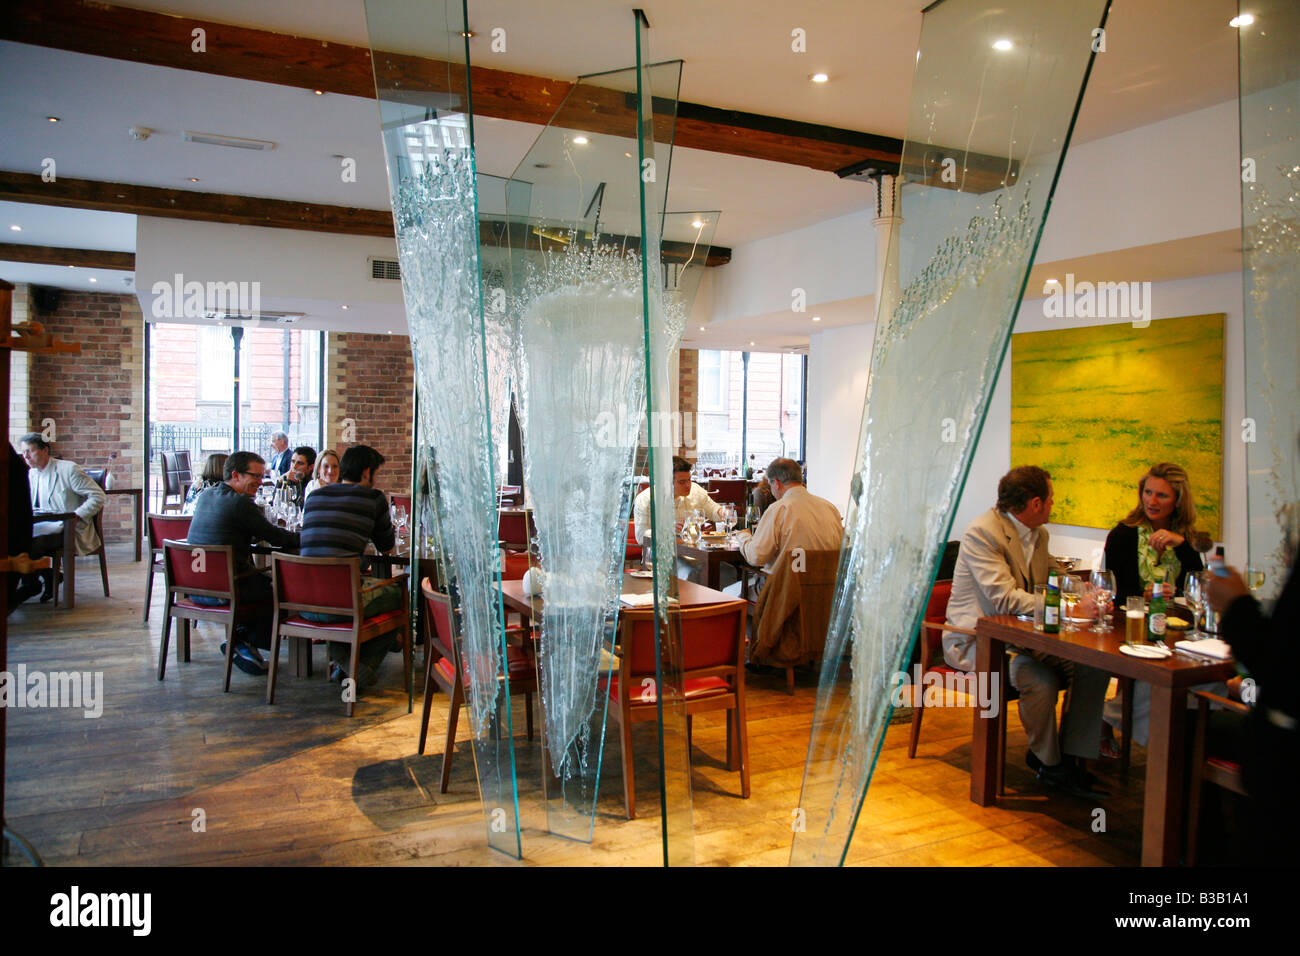 July 2008 - London Carriage Works Restaurant which is considered one of Liverpools finest restaurant England UK Stock Photo